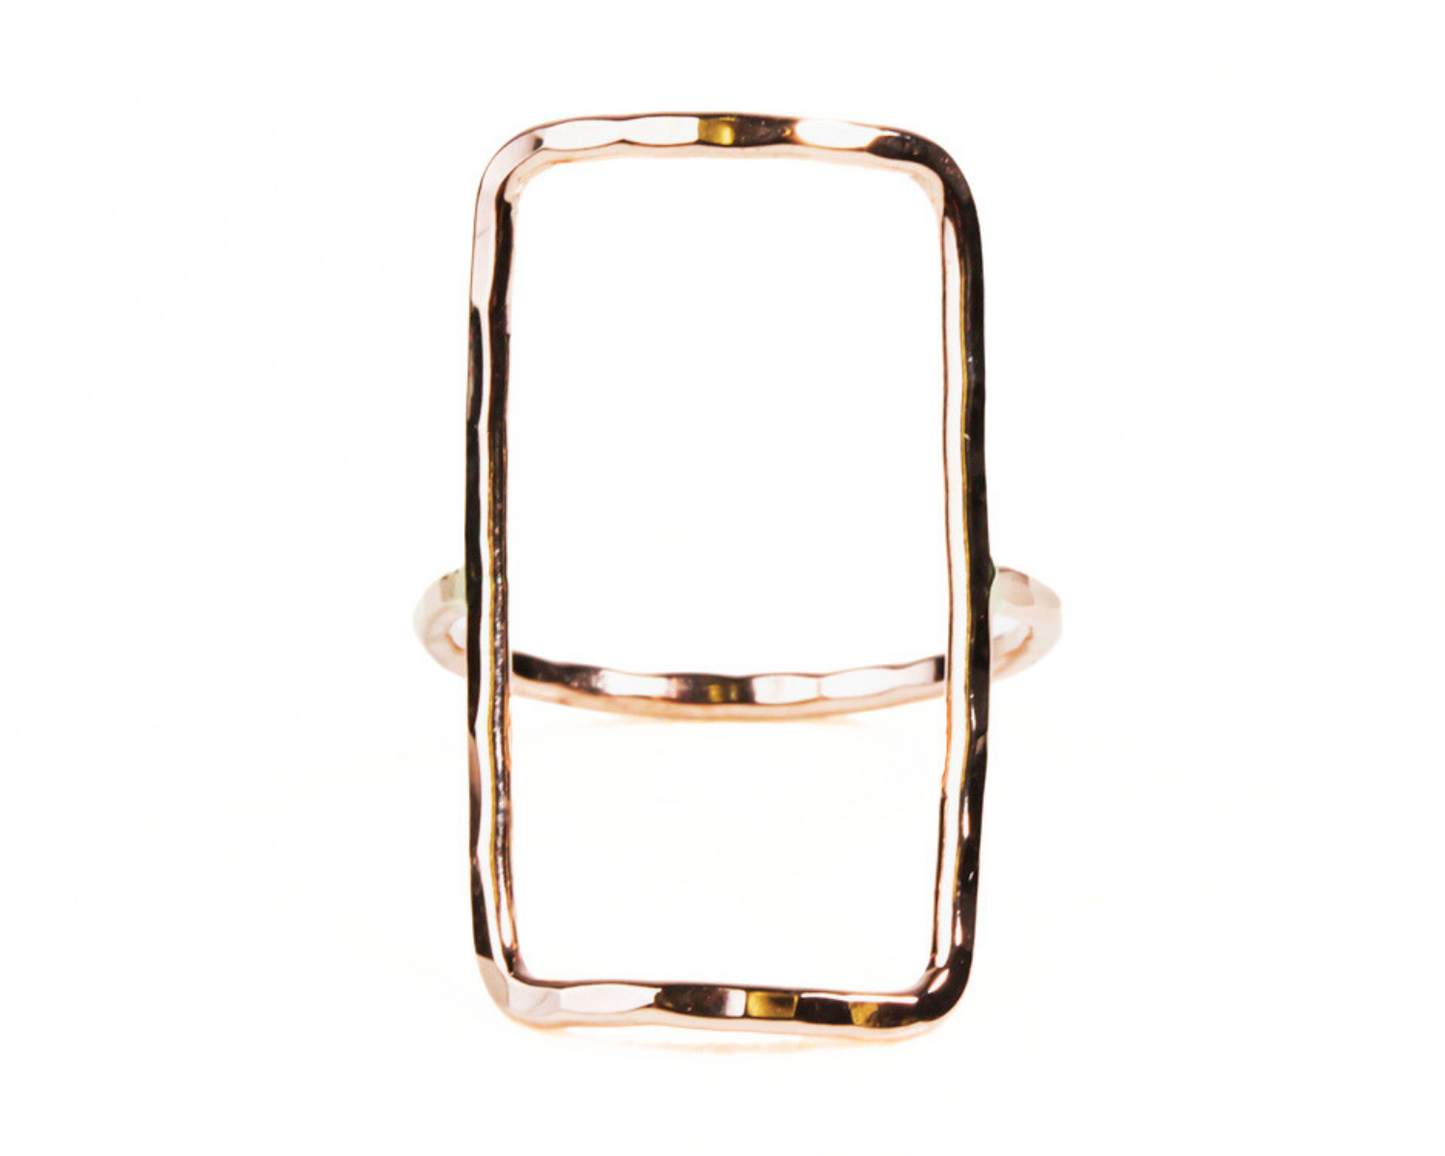 Handcrafted in fine metal, our open rectangle ring is made to withstand the test of time.